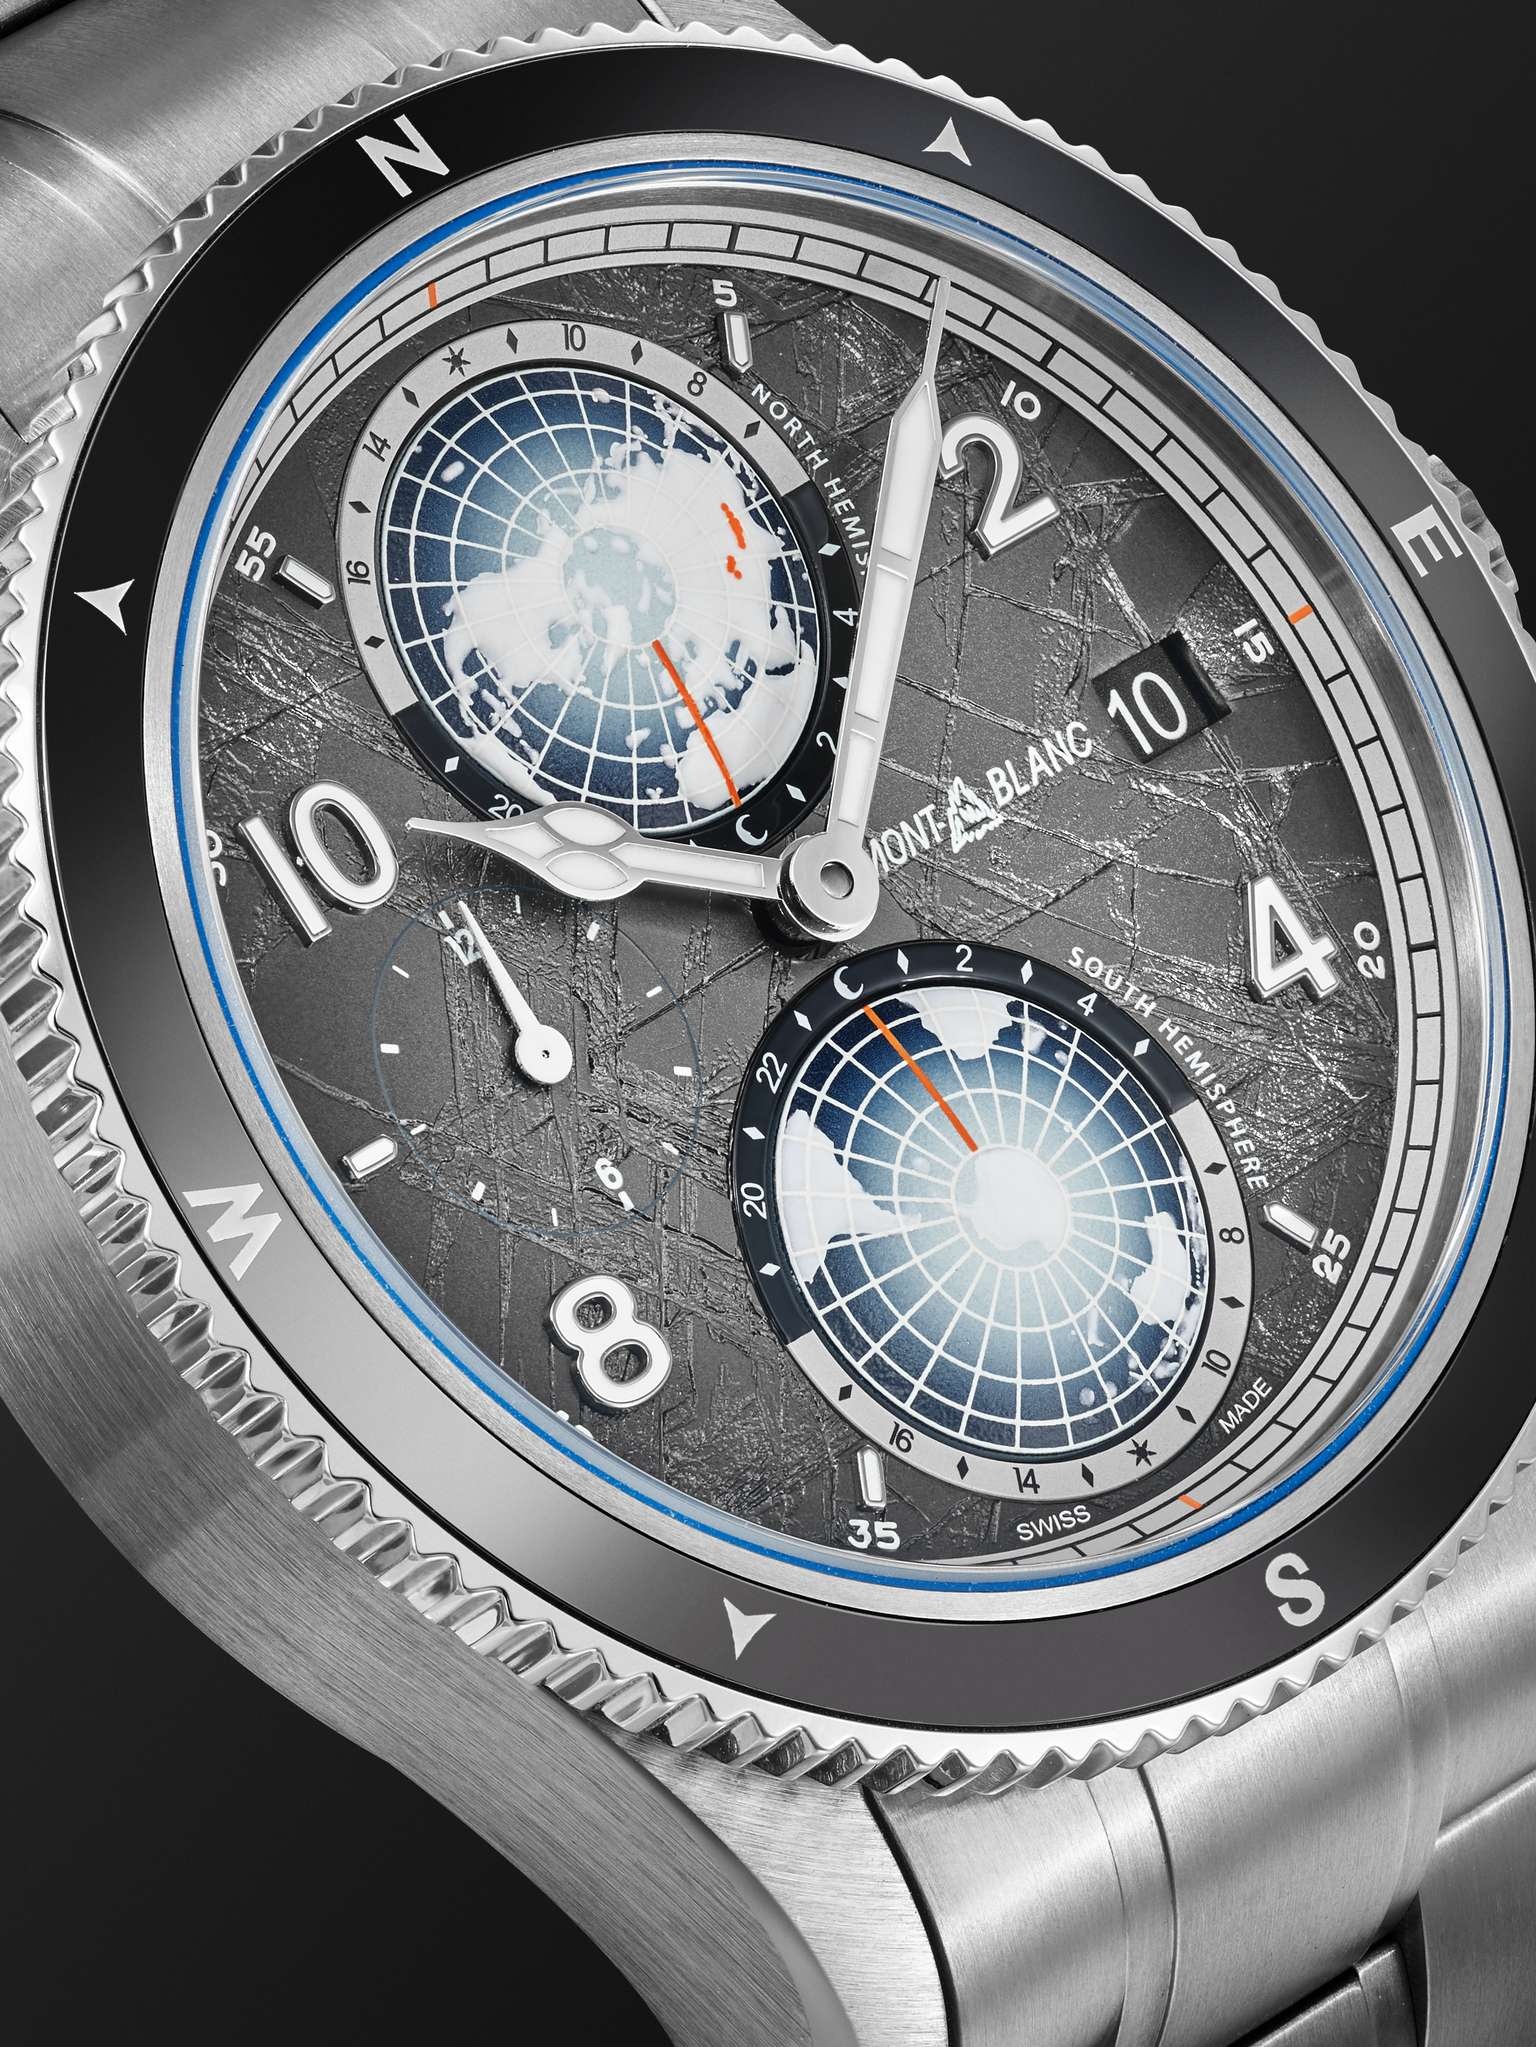 Montblanc 1858 Geosphere 0 Oxygen The 8000 Automatic 42mm Titanium, Ceramic and Stainless Steel Watc - 5